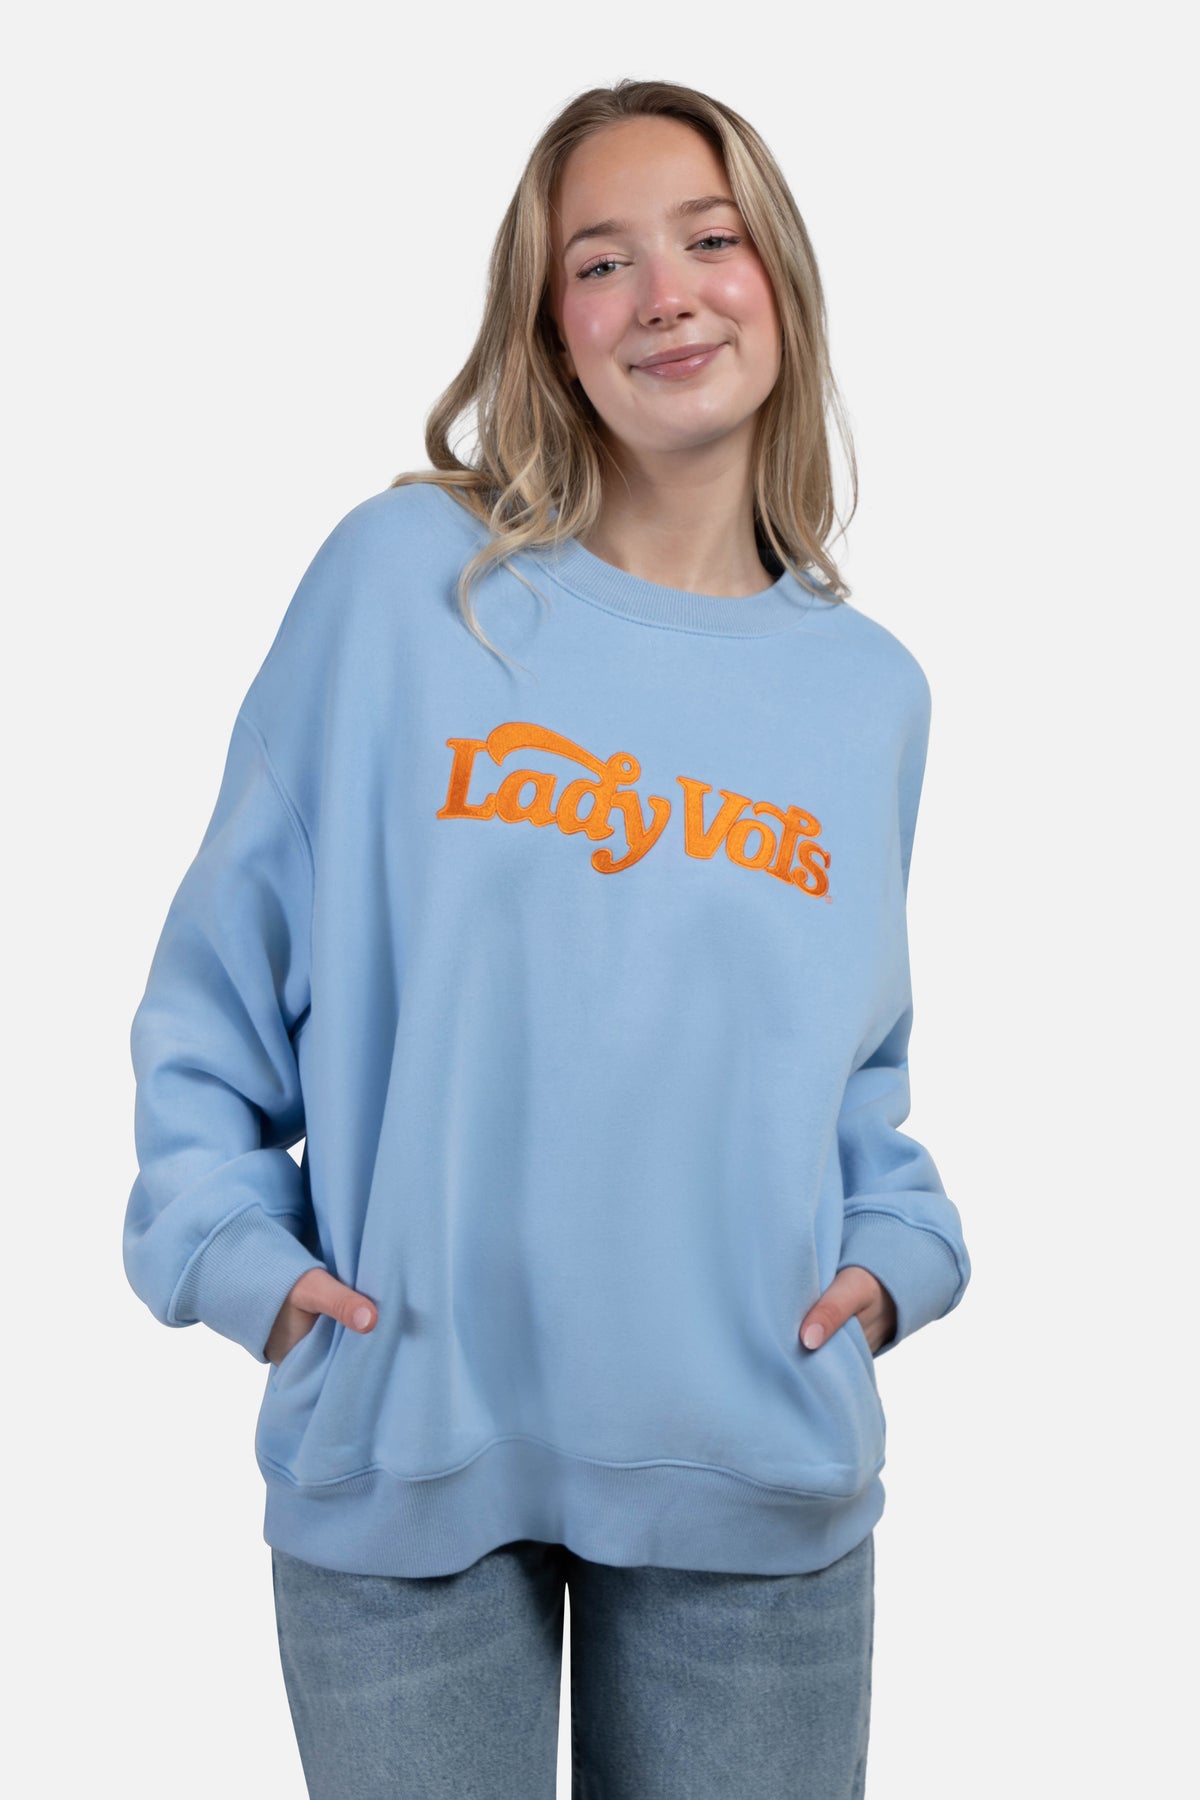 University of Tennessee Offside Crewneck